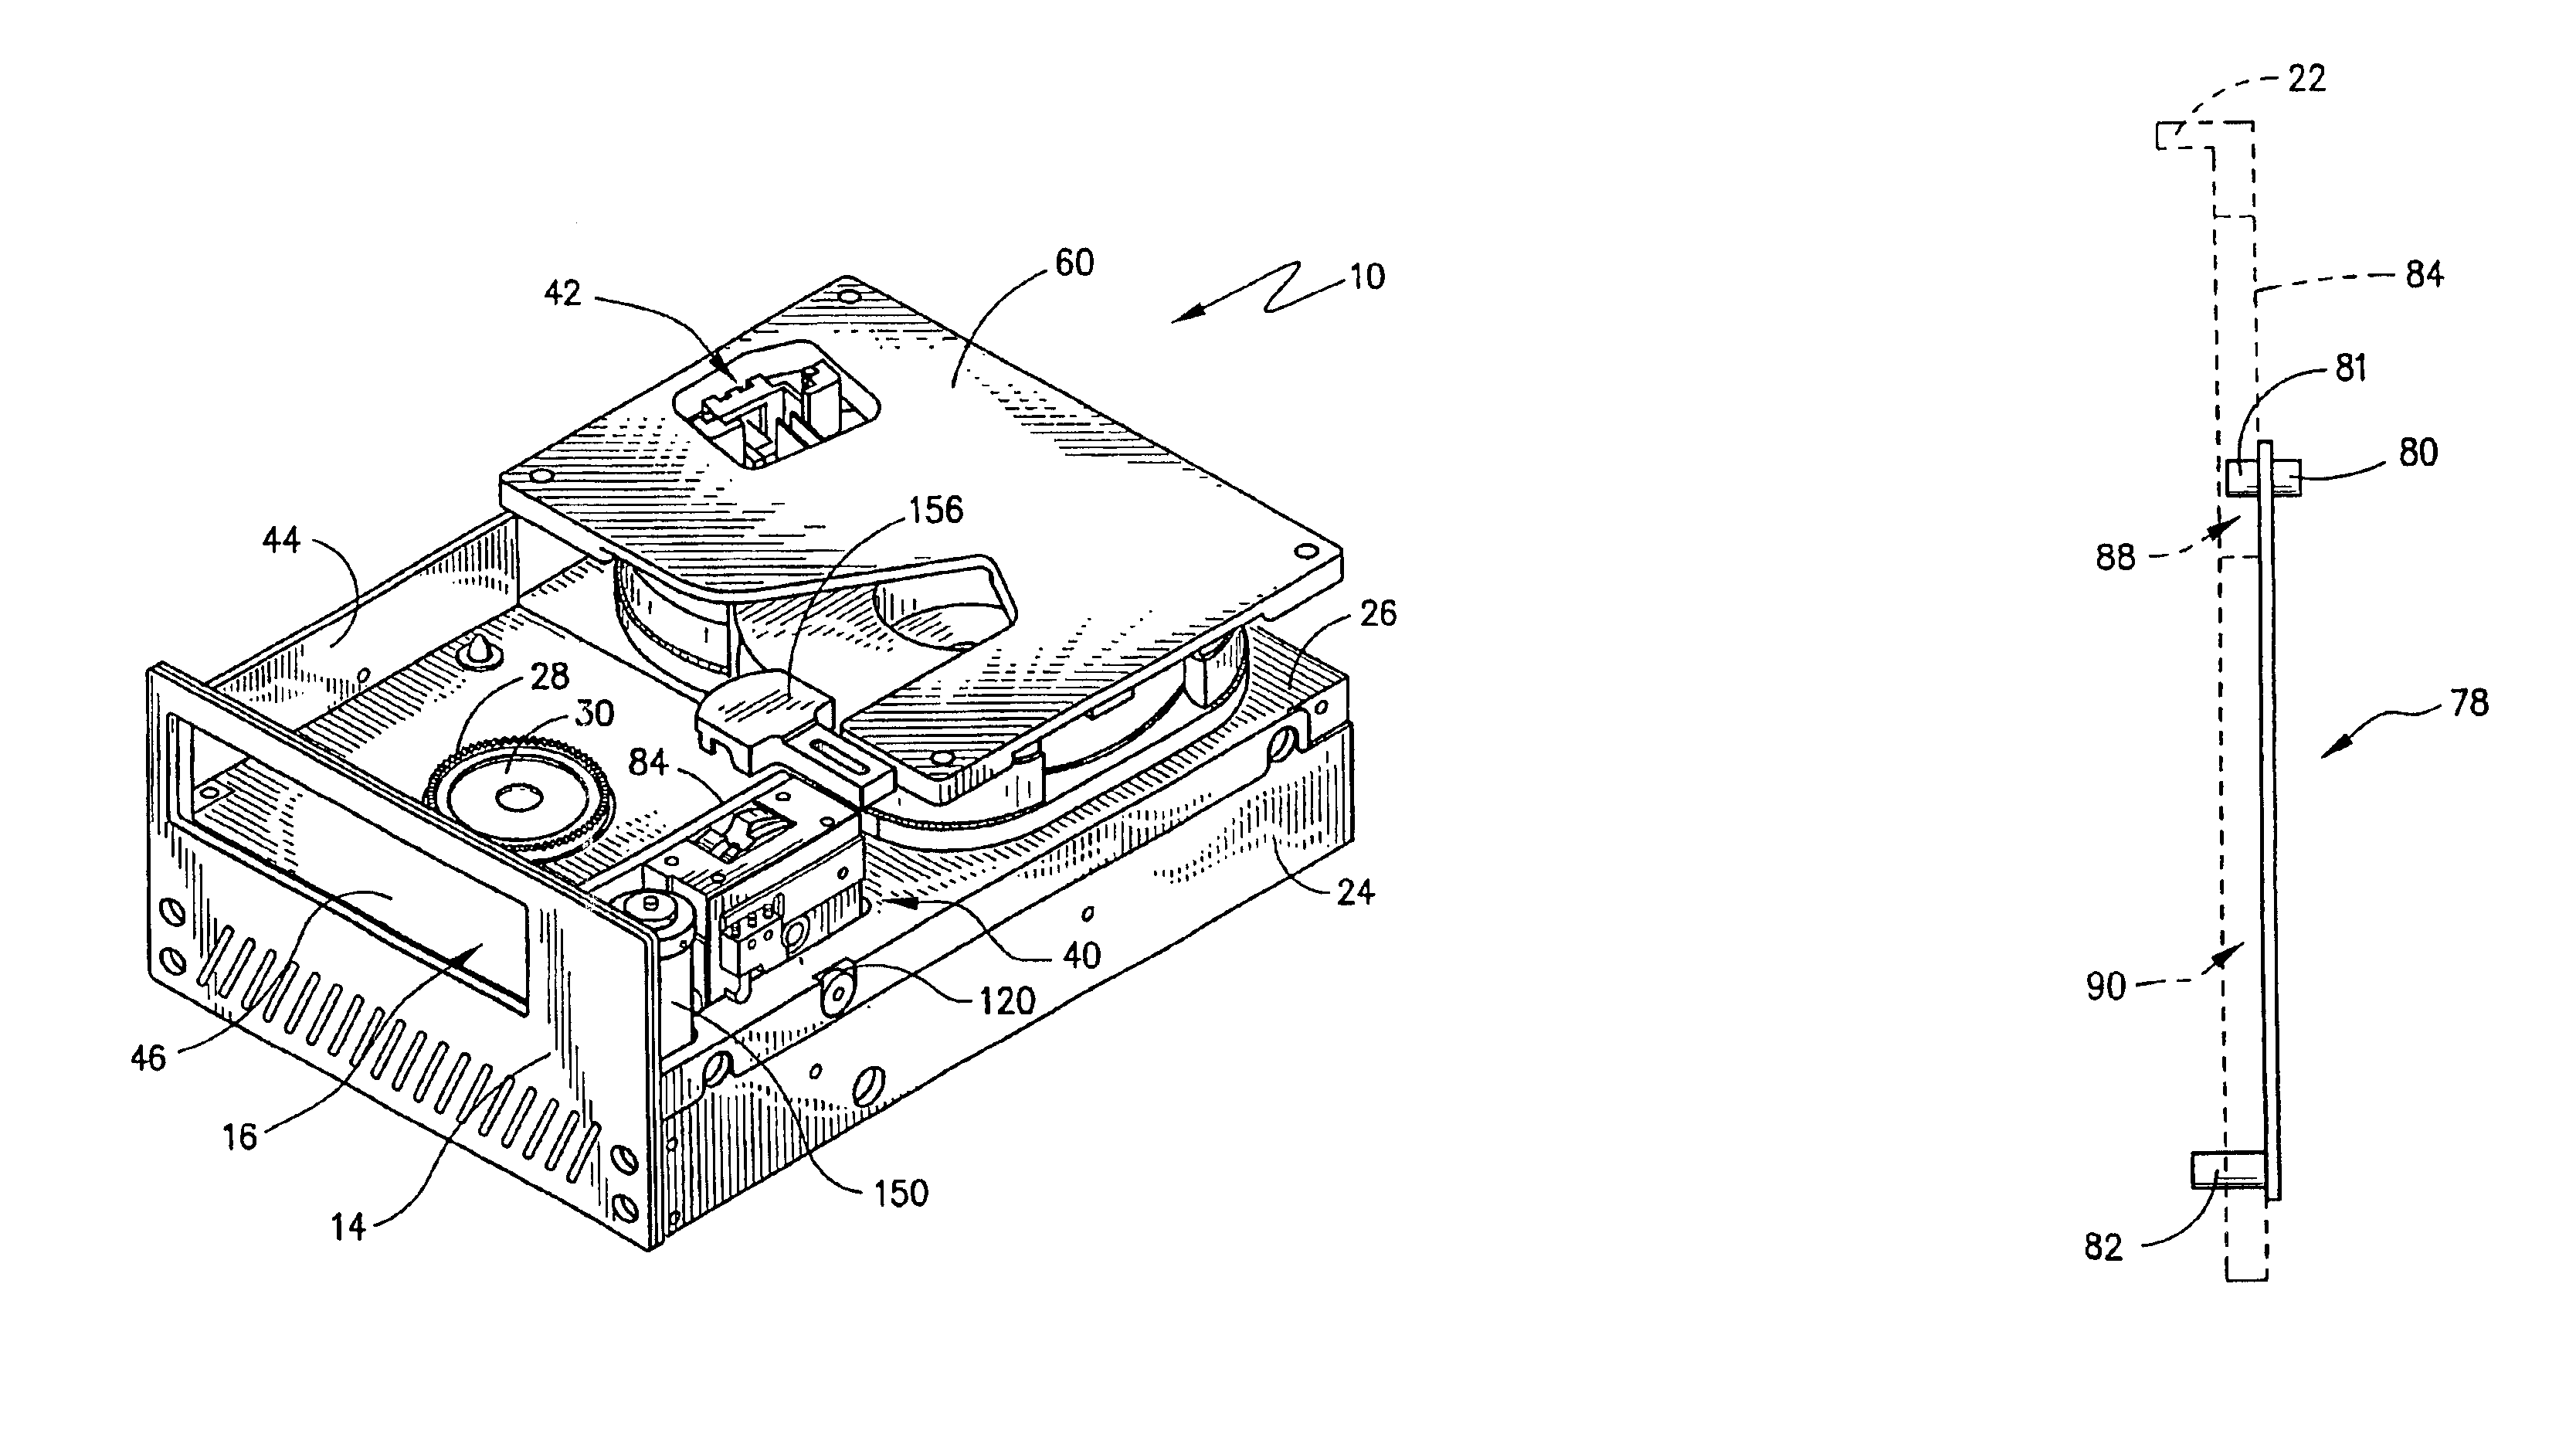 Tape cartridge docking apparatus for read/write recording assemblies and method therefor